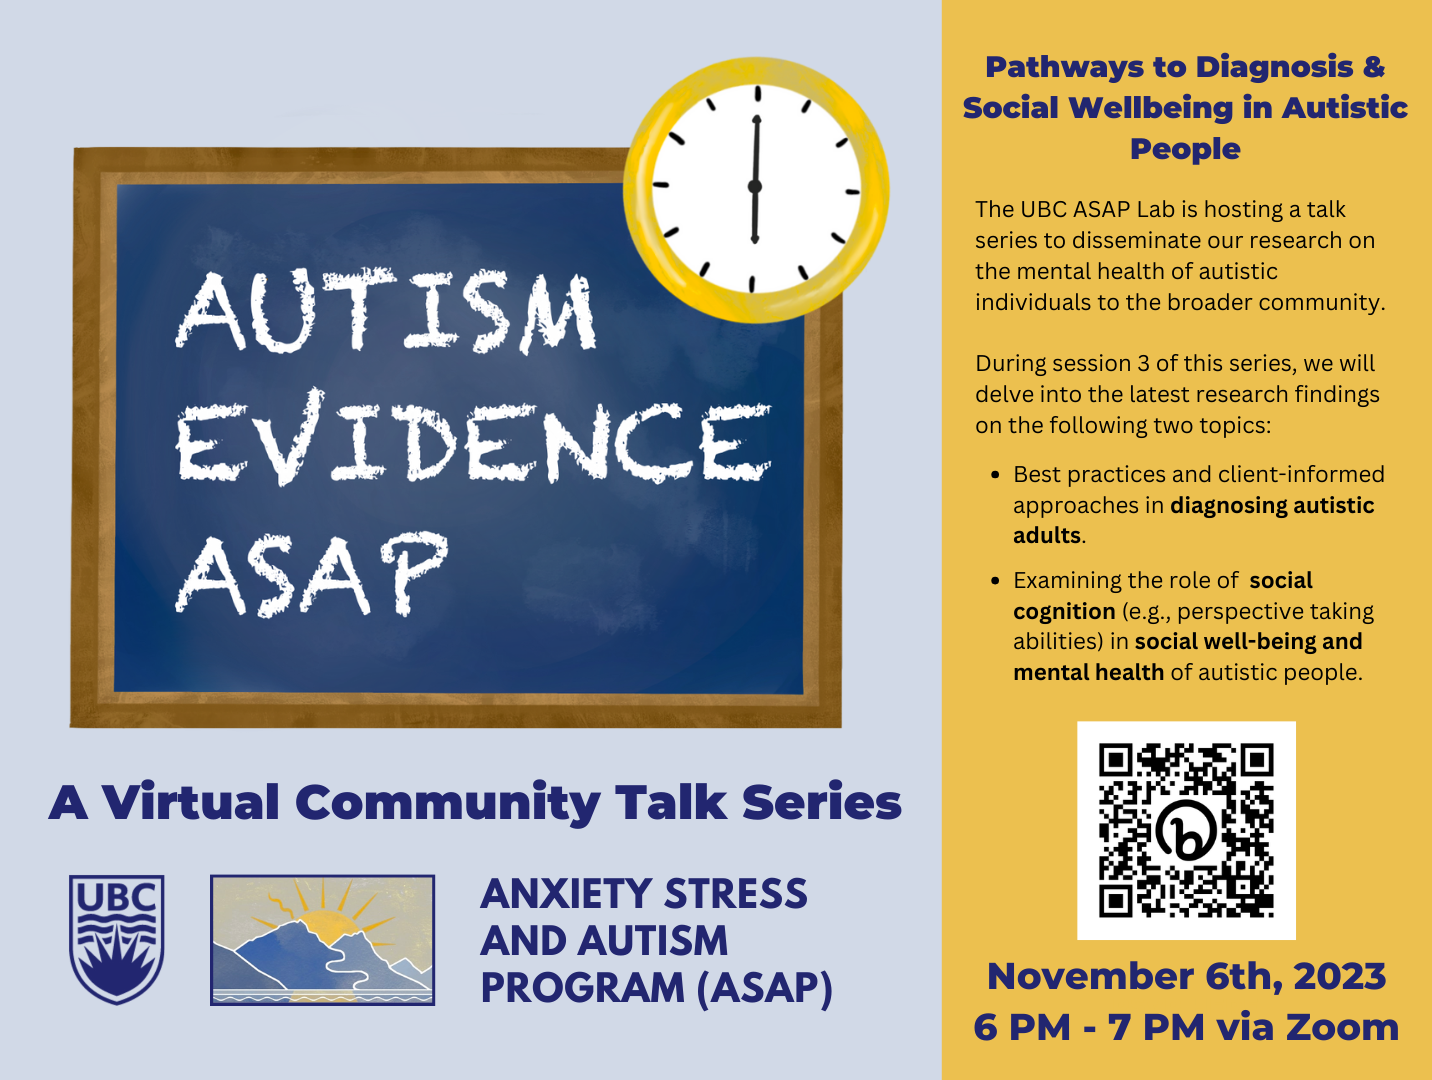 UBC ASAP Lab's Community Talk Event: Pathways to Diagnosis & Social Wellbeing in Autistic People